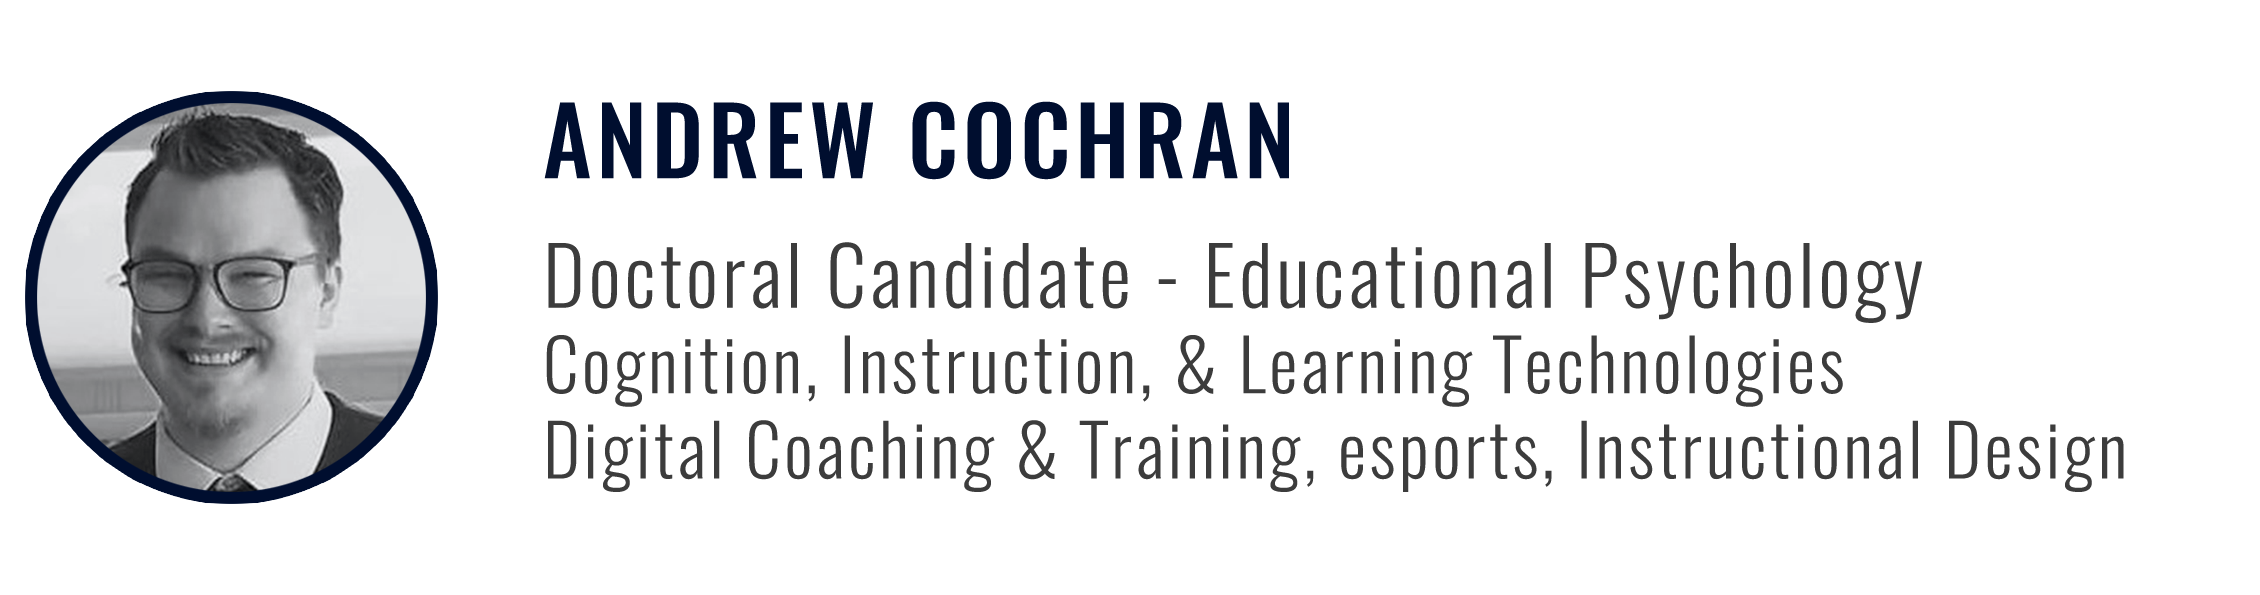 Andrew Cochran, Doctoral Candidate